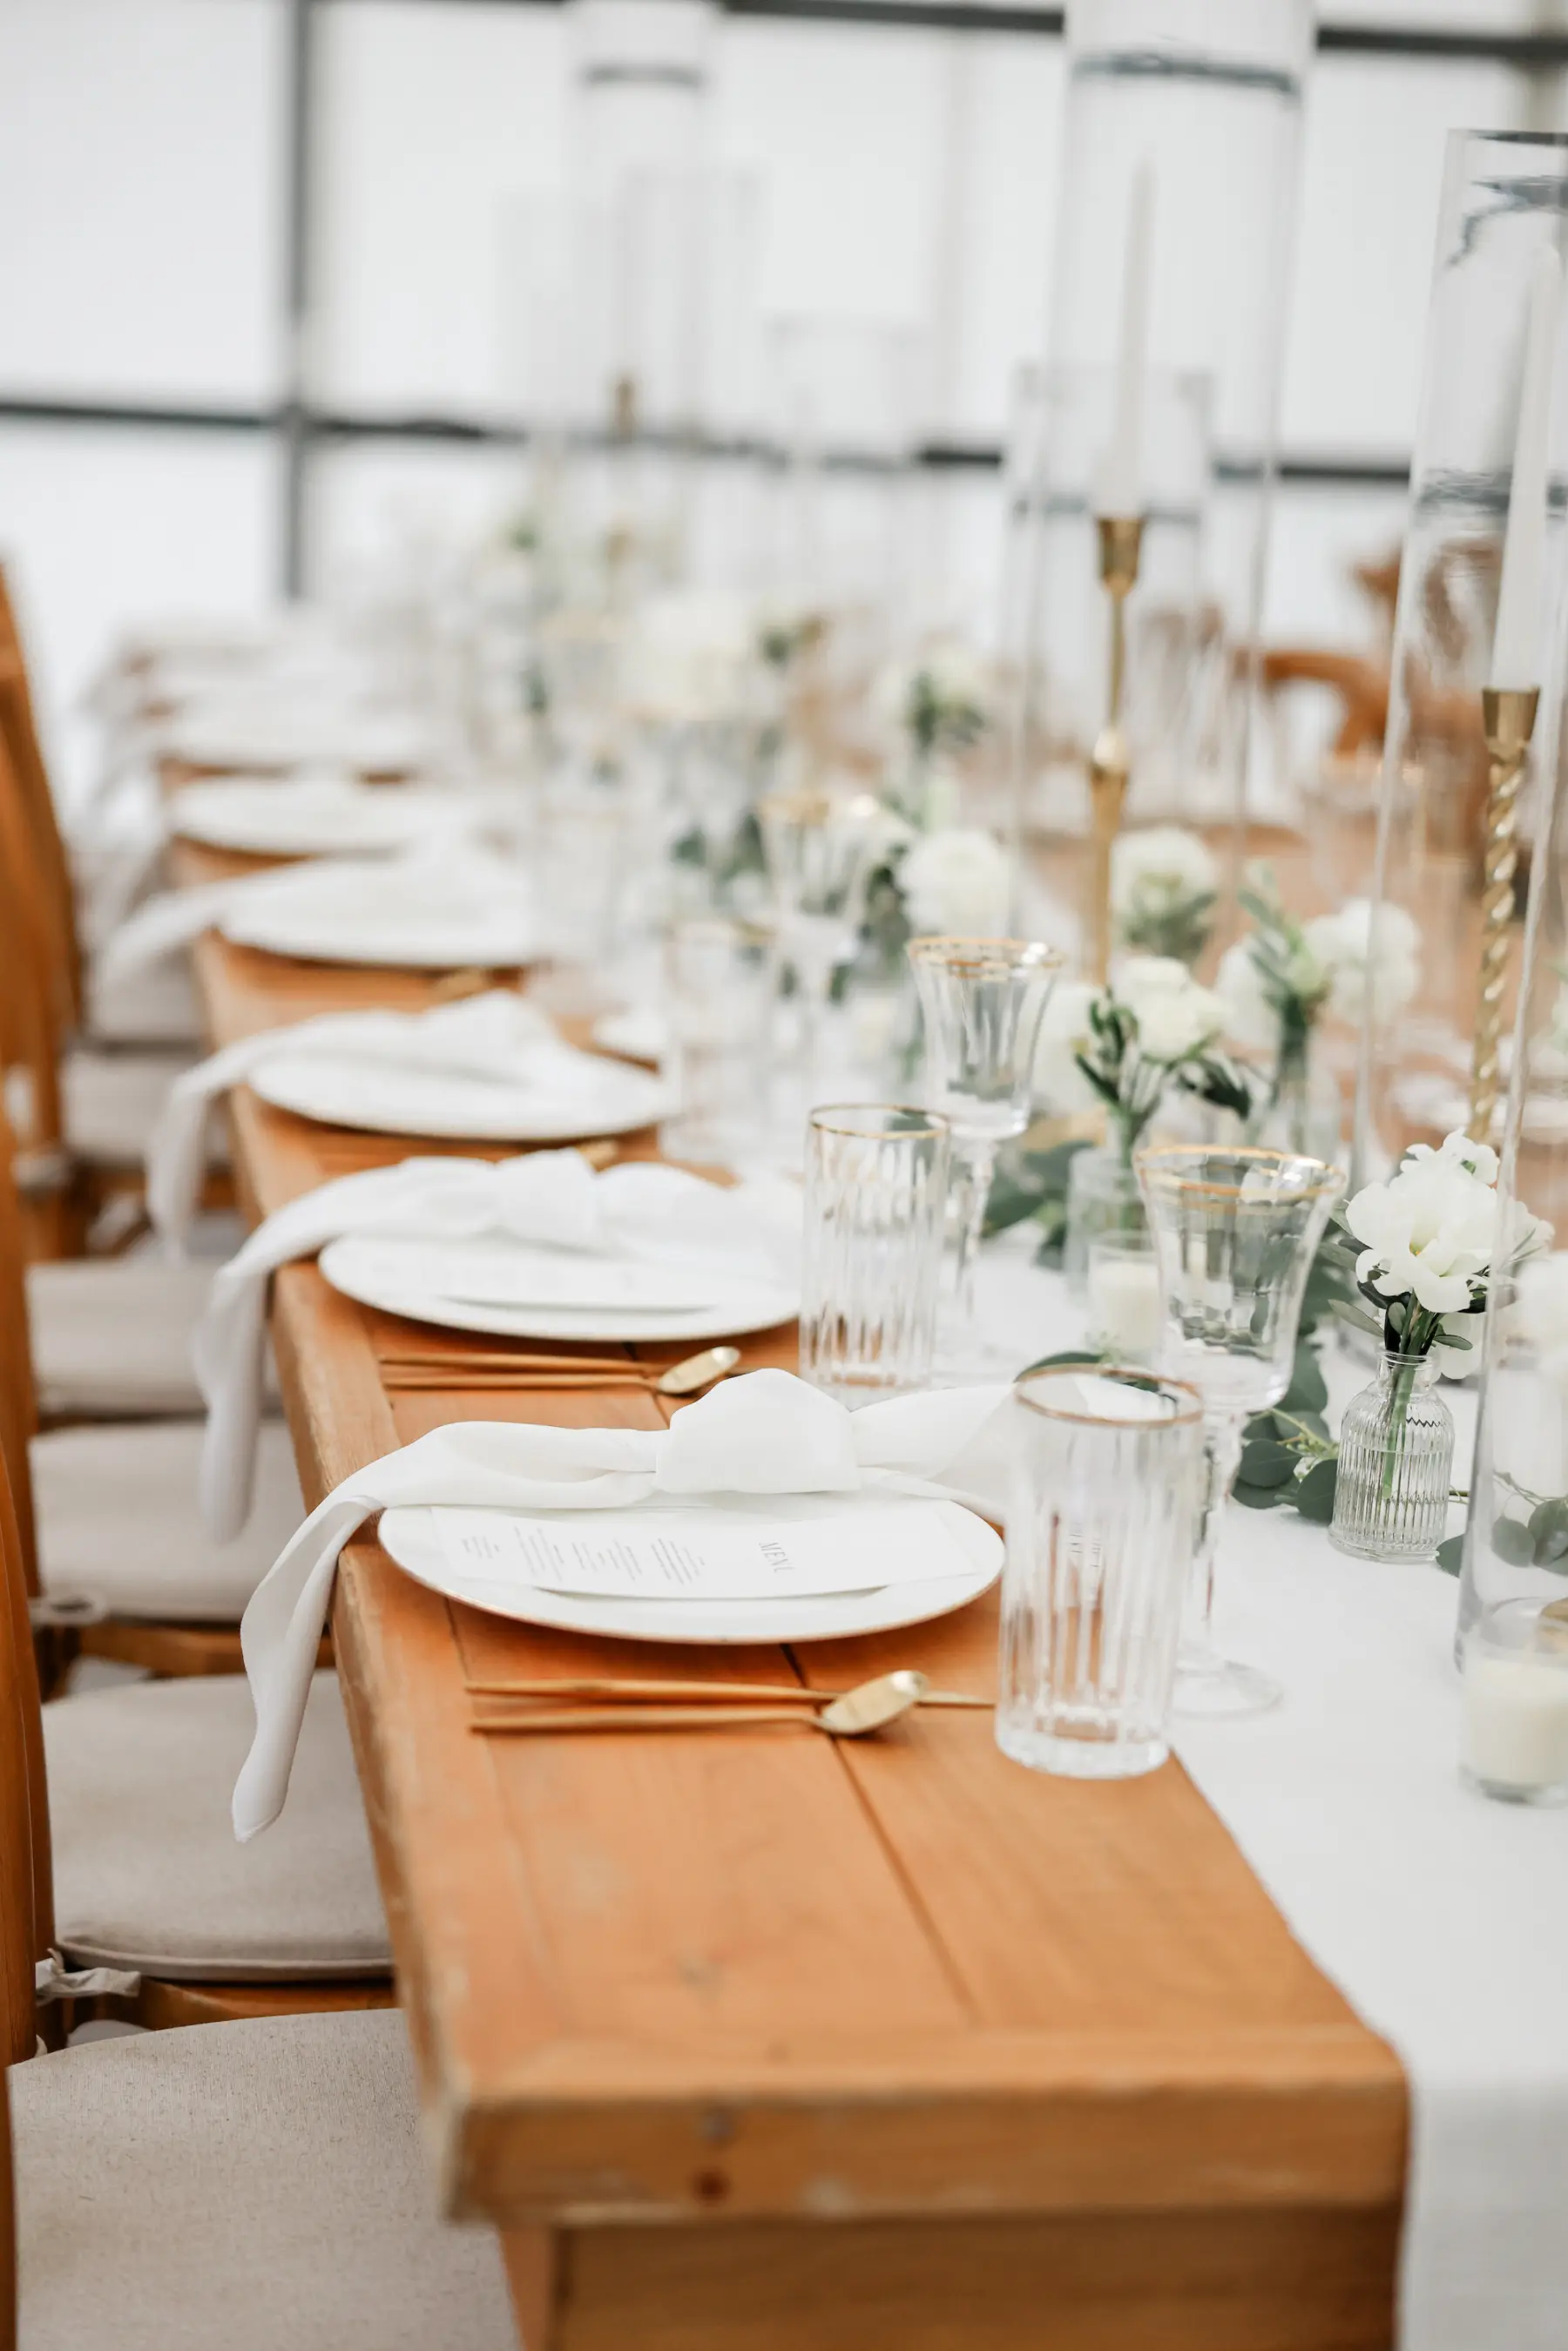 Classic White and Gold Wedding Reception Place Setting Inspiration | Gold Flatware | Modern Black and White Menu Cart | Ribbed Gold Rimmed Glass |Tampa Bay Kate Ryan Event Rentals